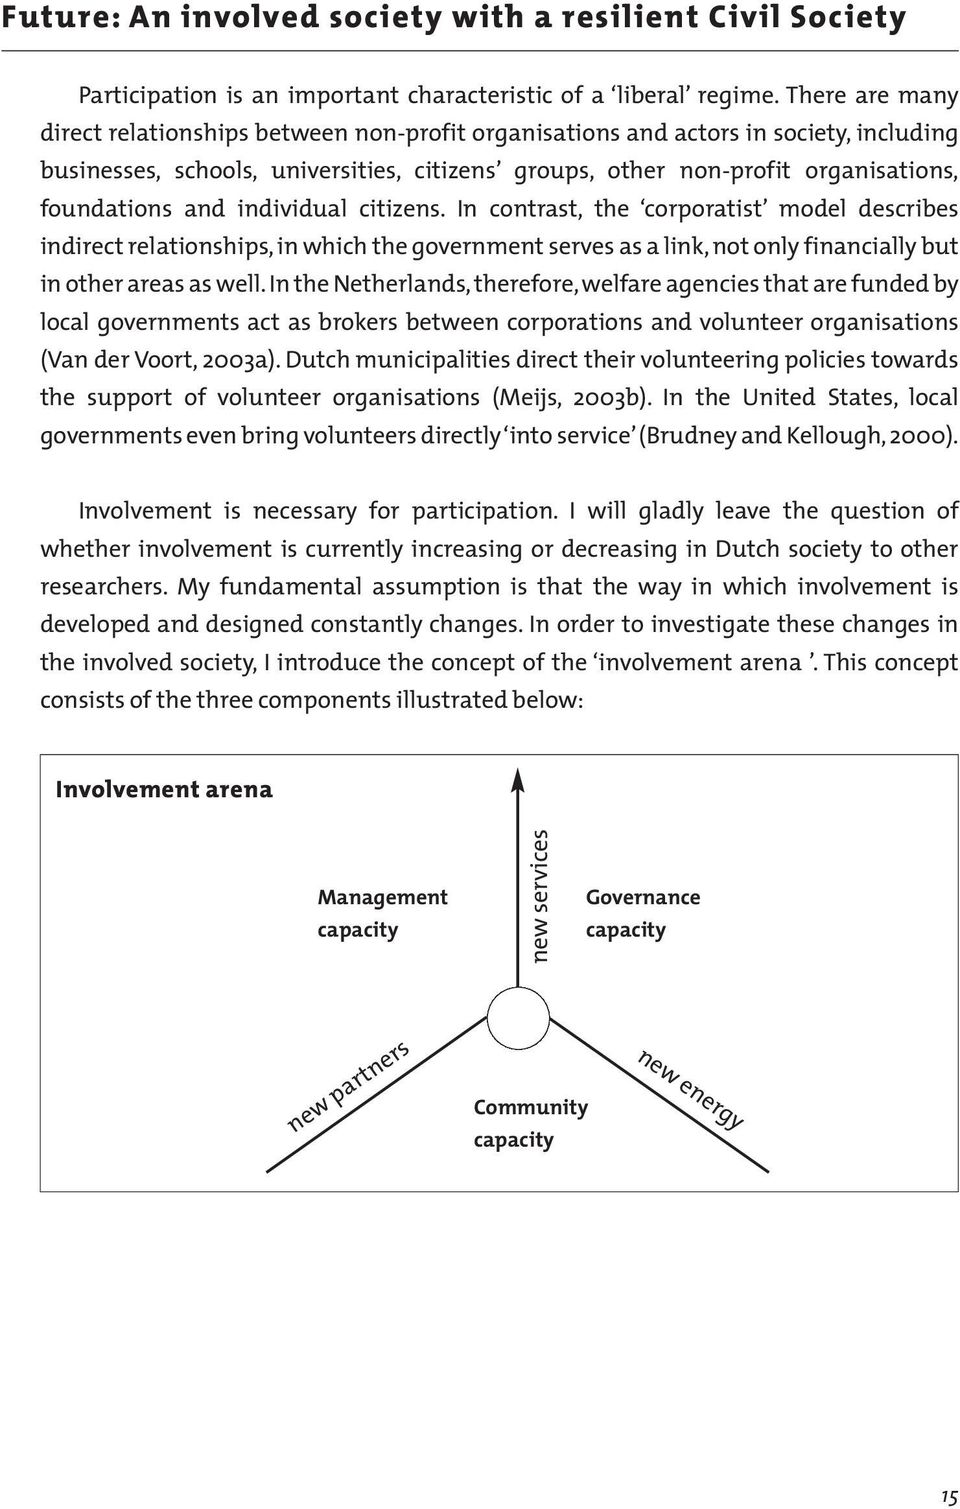 and individual citizens. In contrast, the corporatist model describes indirect relationships, in which the government serves as a link, not only financially but in other areas as well.